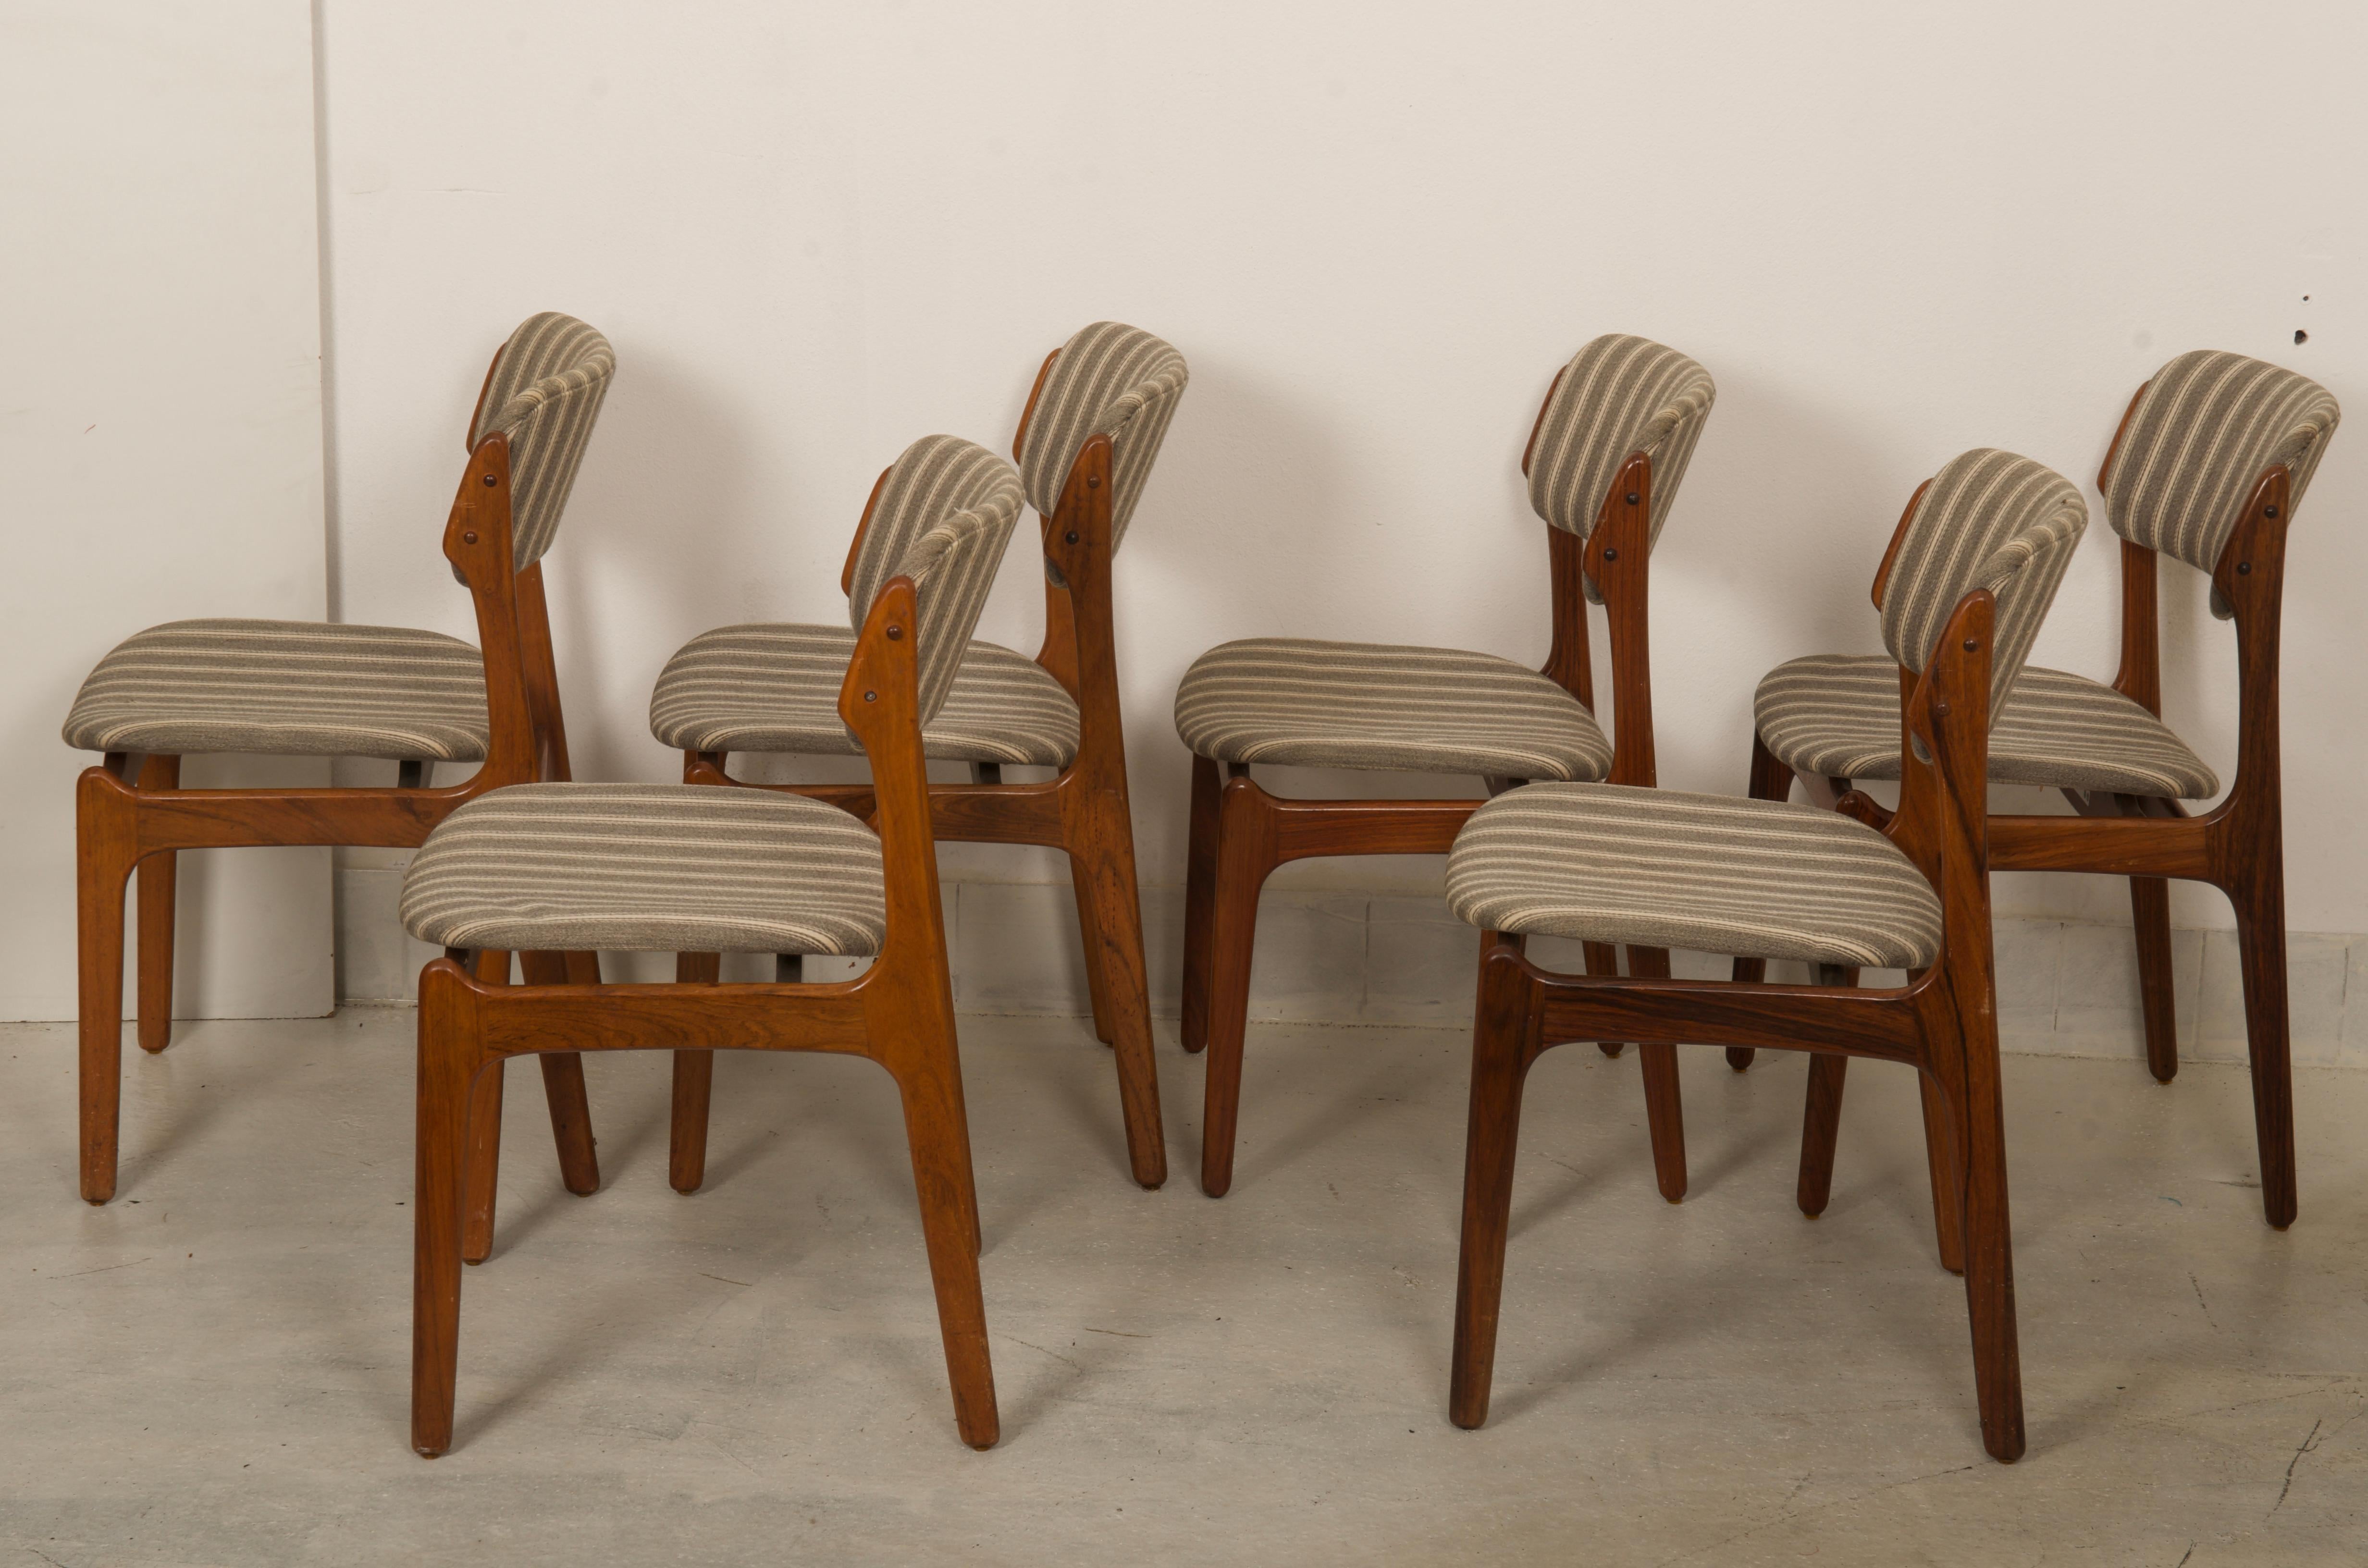 Mid-20th Century Danish Hardwood Dining Chairs OD-49 by Erik Buch For Sale